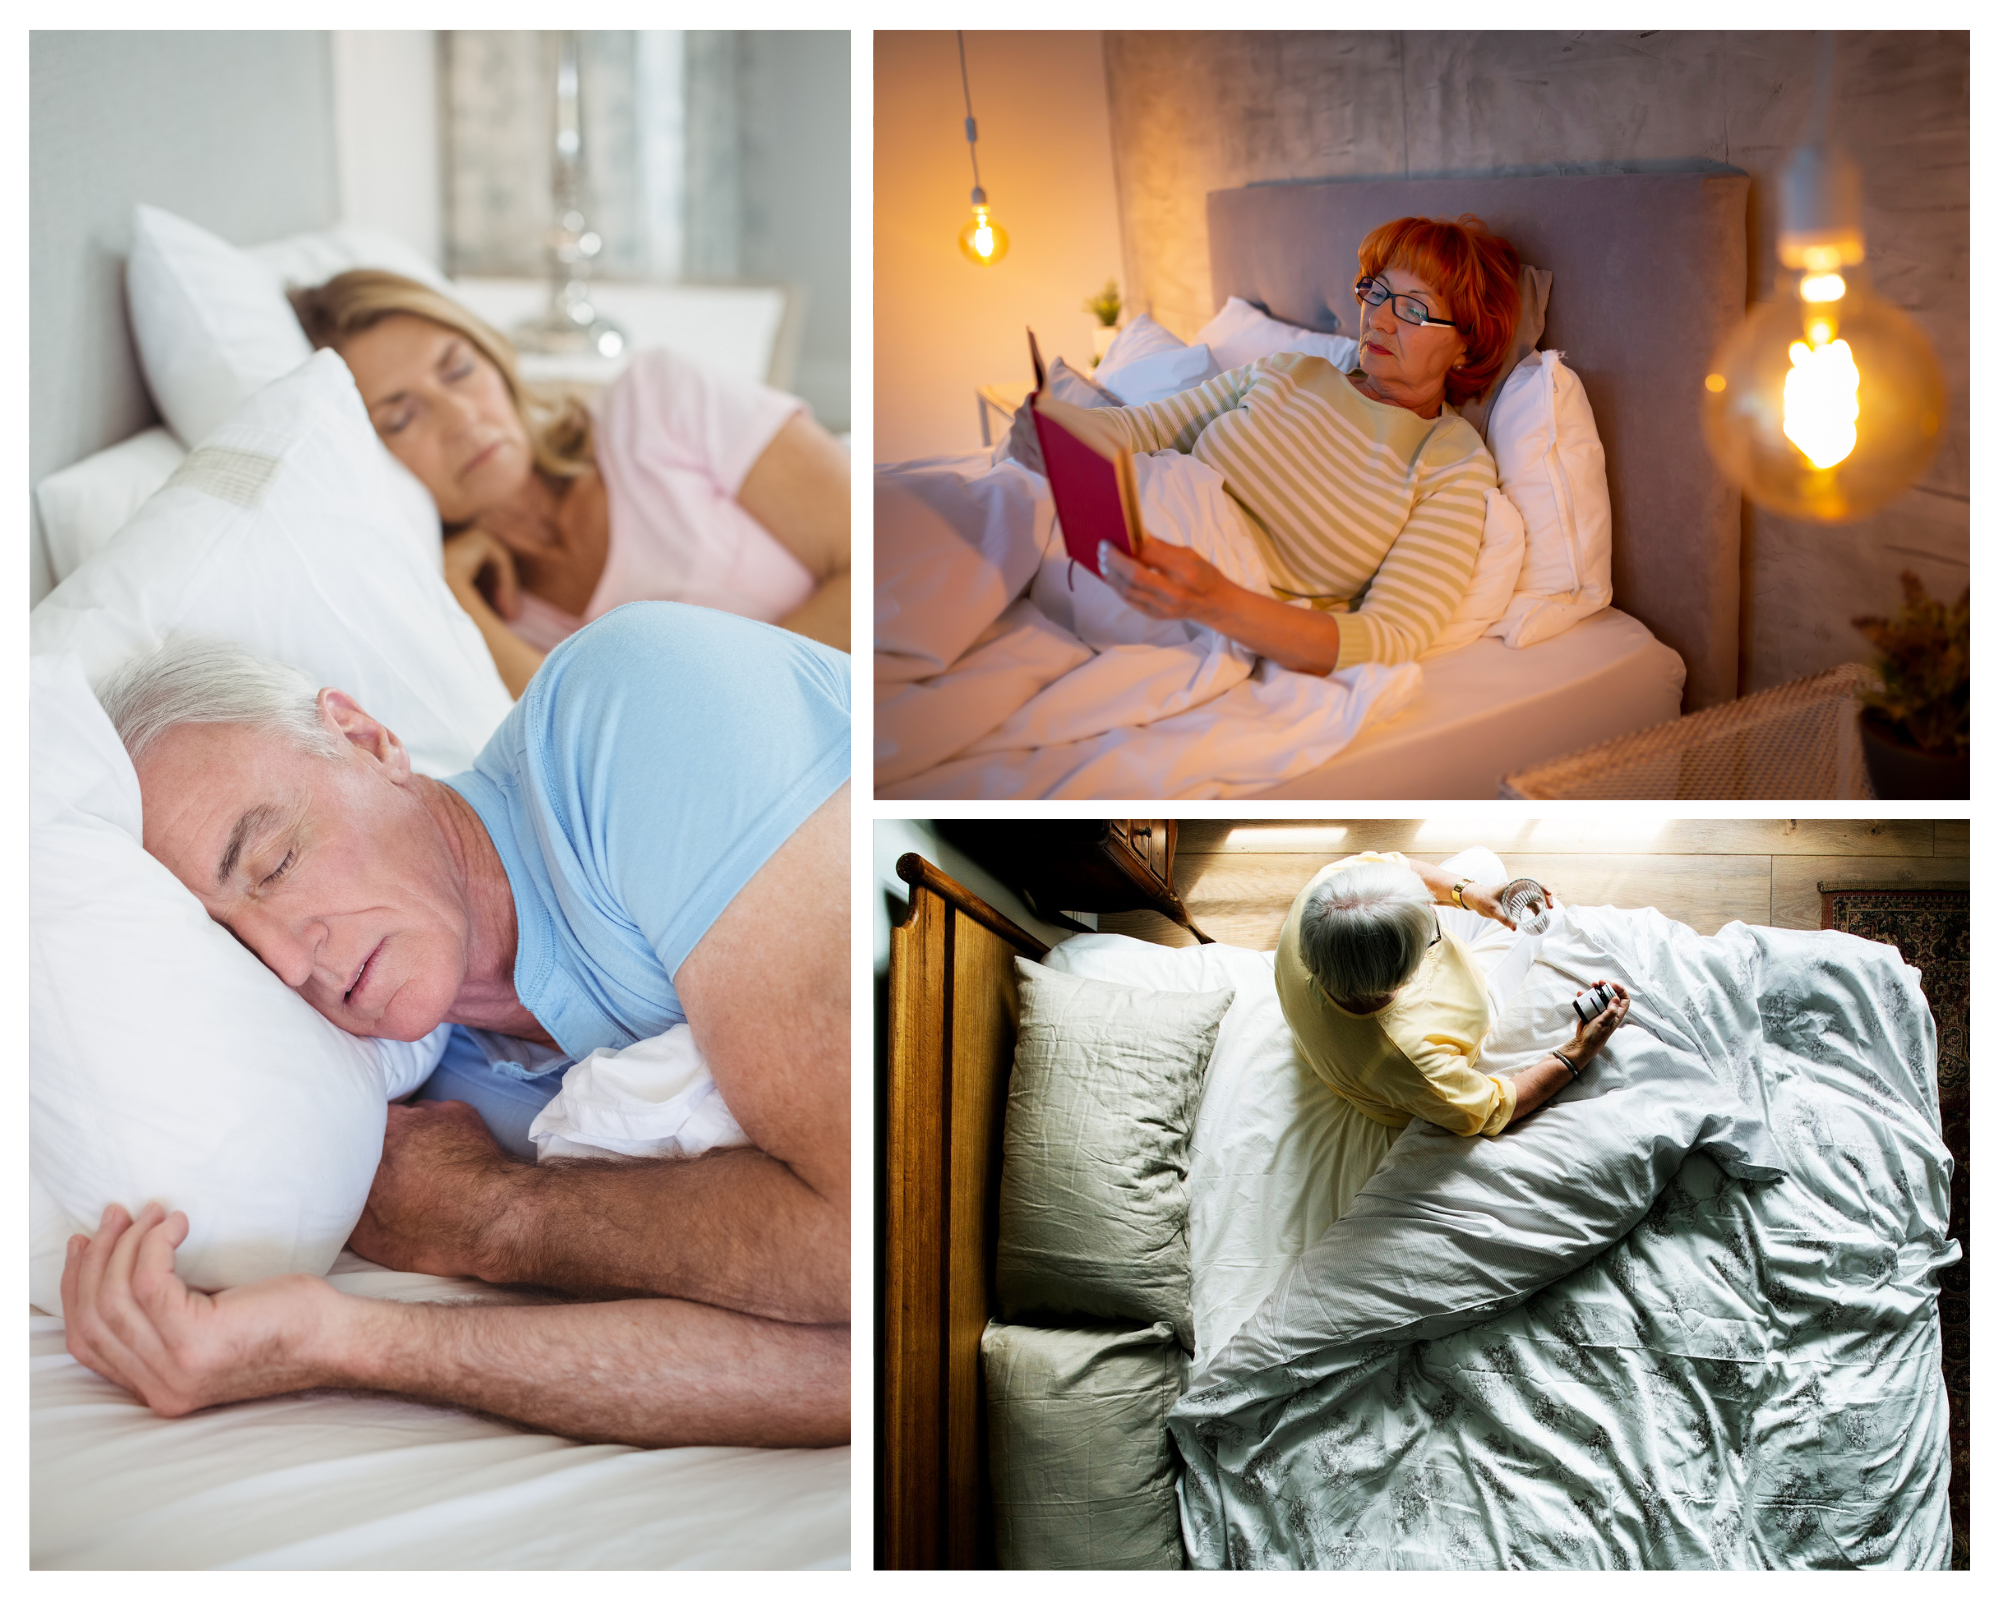 Follow these steps to get quality sleep